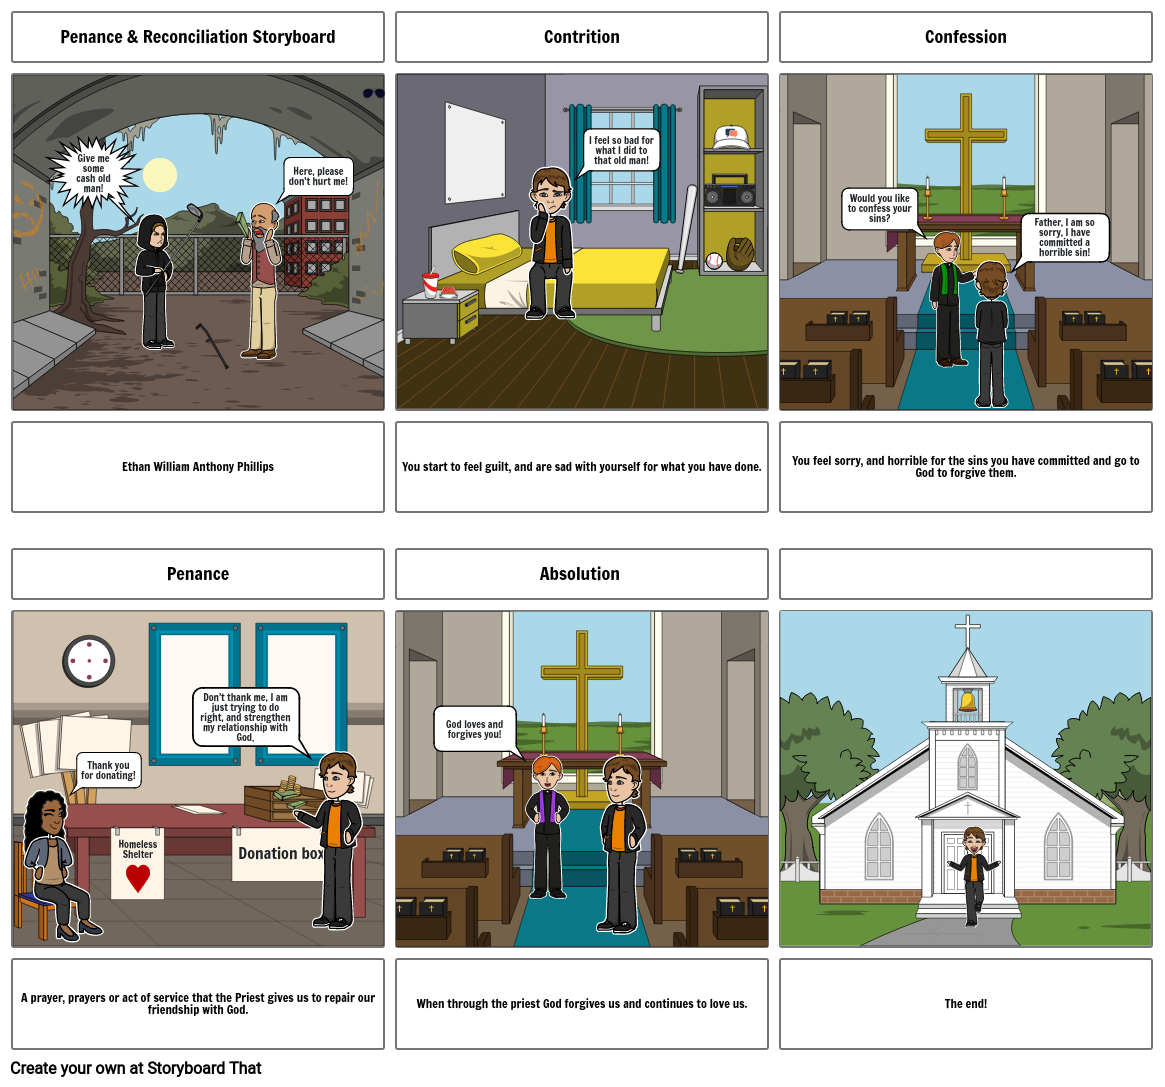 ﻿Penance & Reconciliation Storyboard ﻿Give me some c...